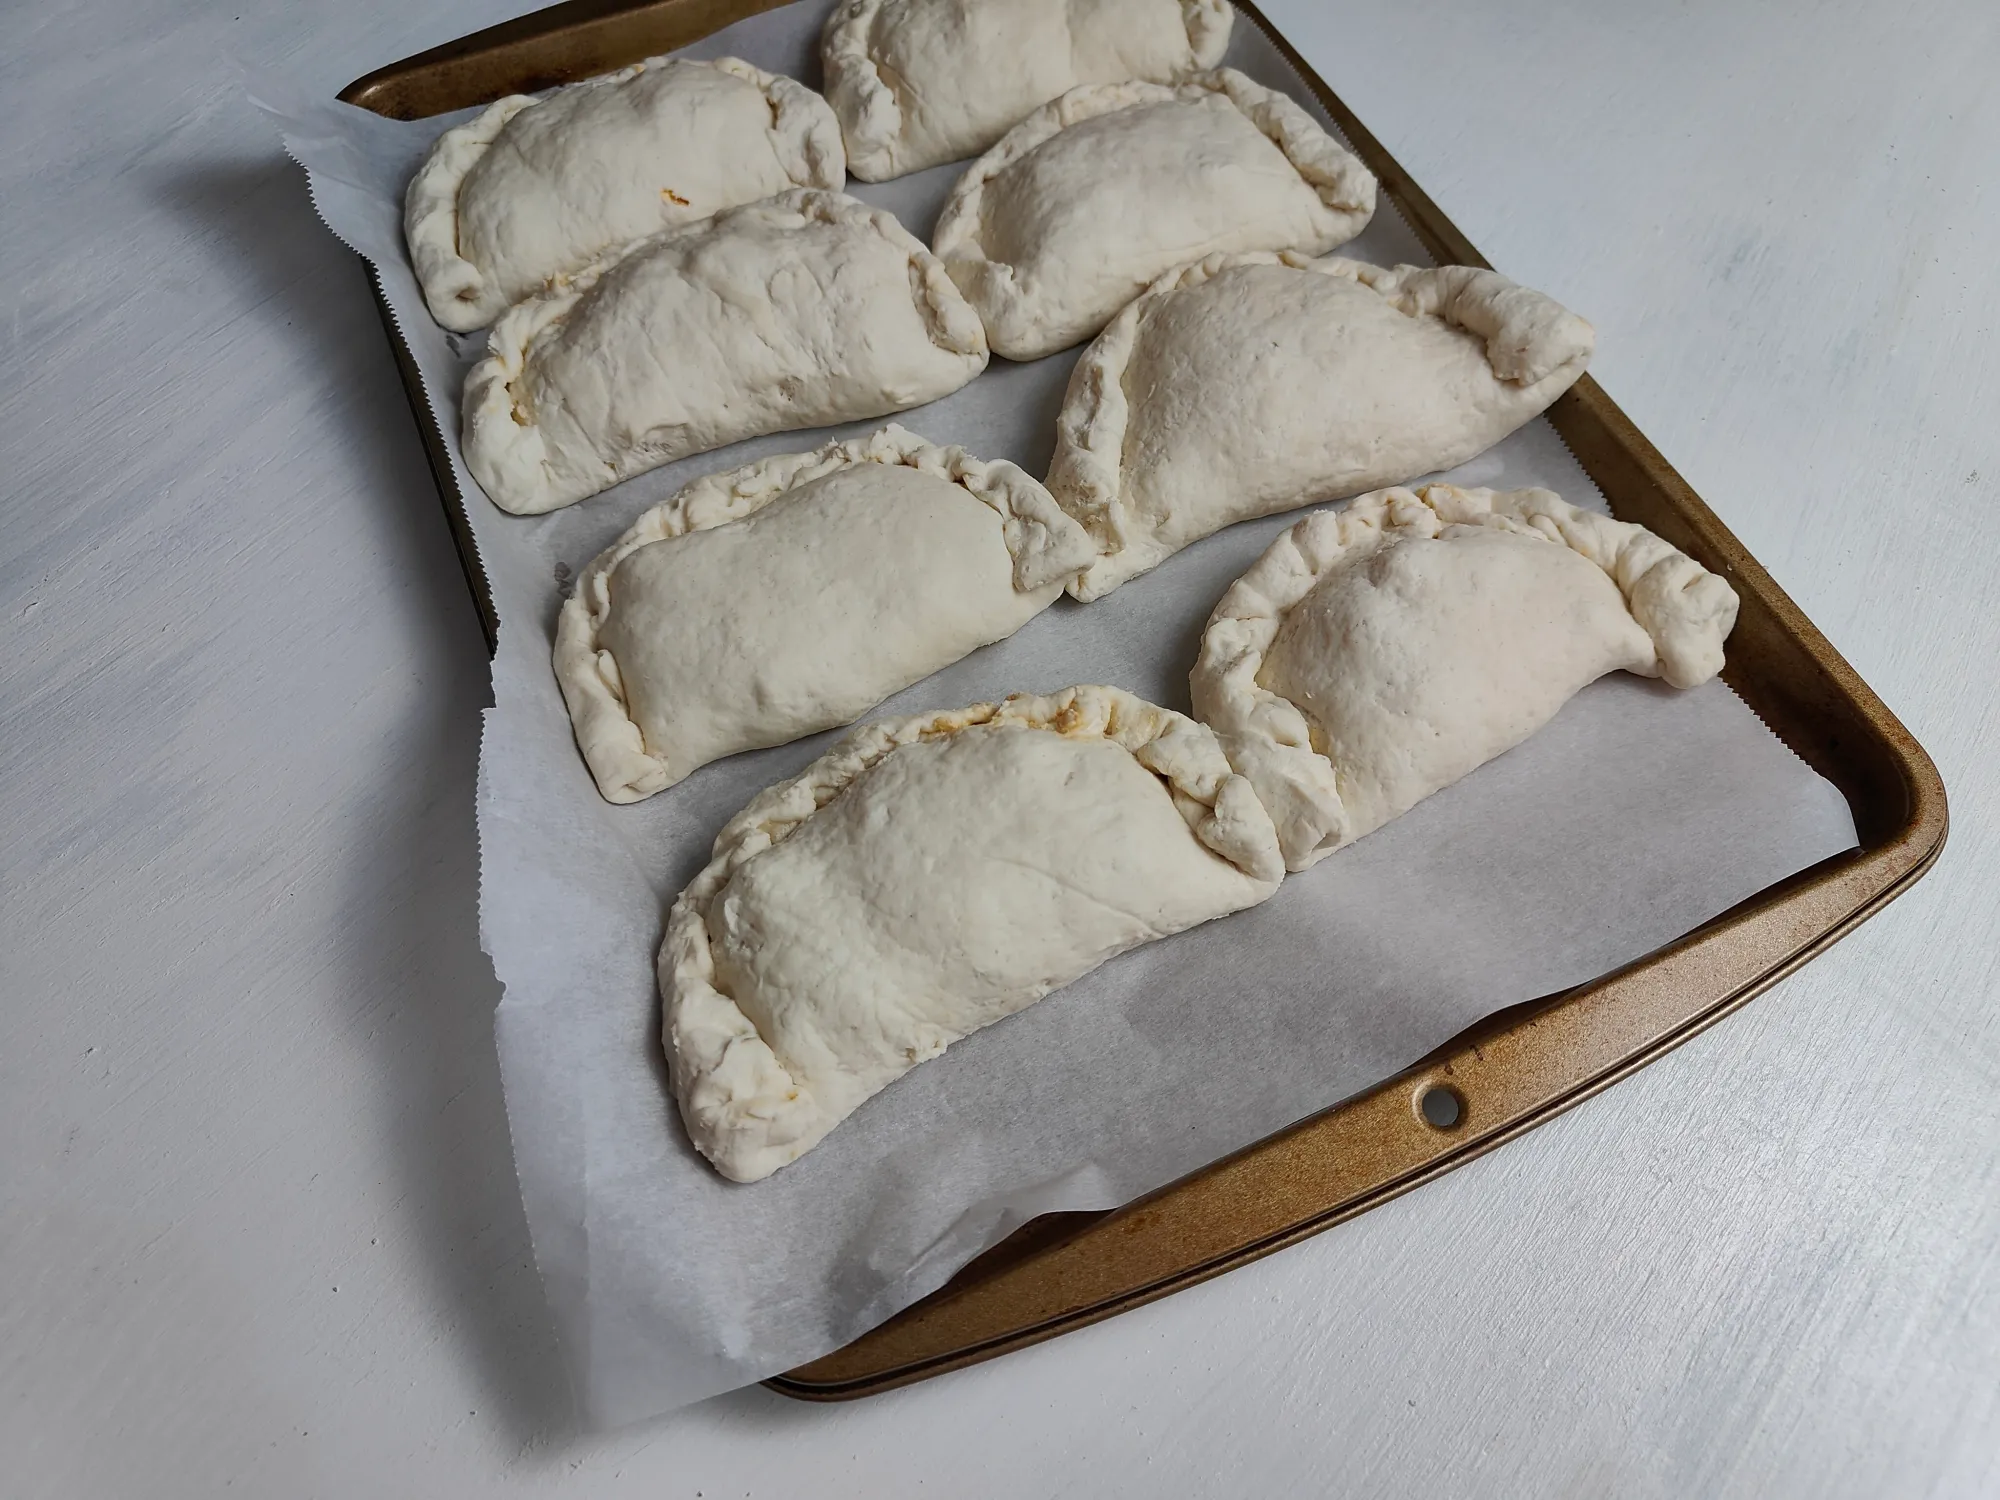 Unbaked calzones on a baking sheet